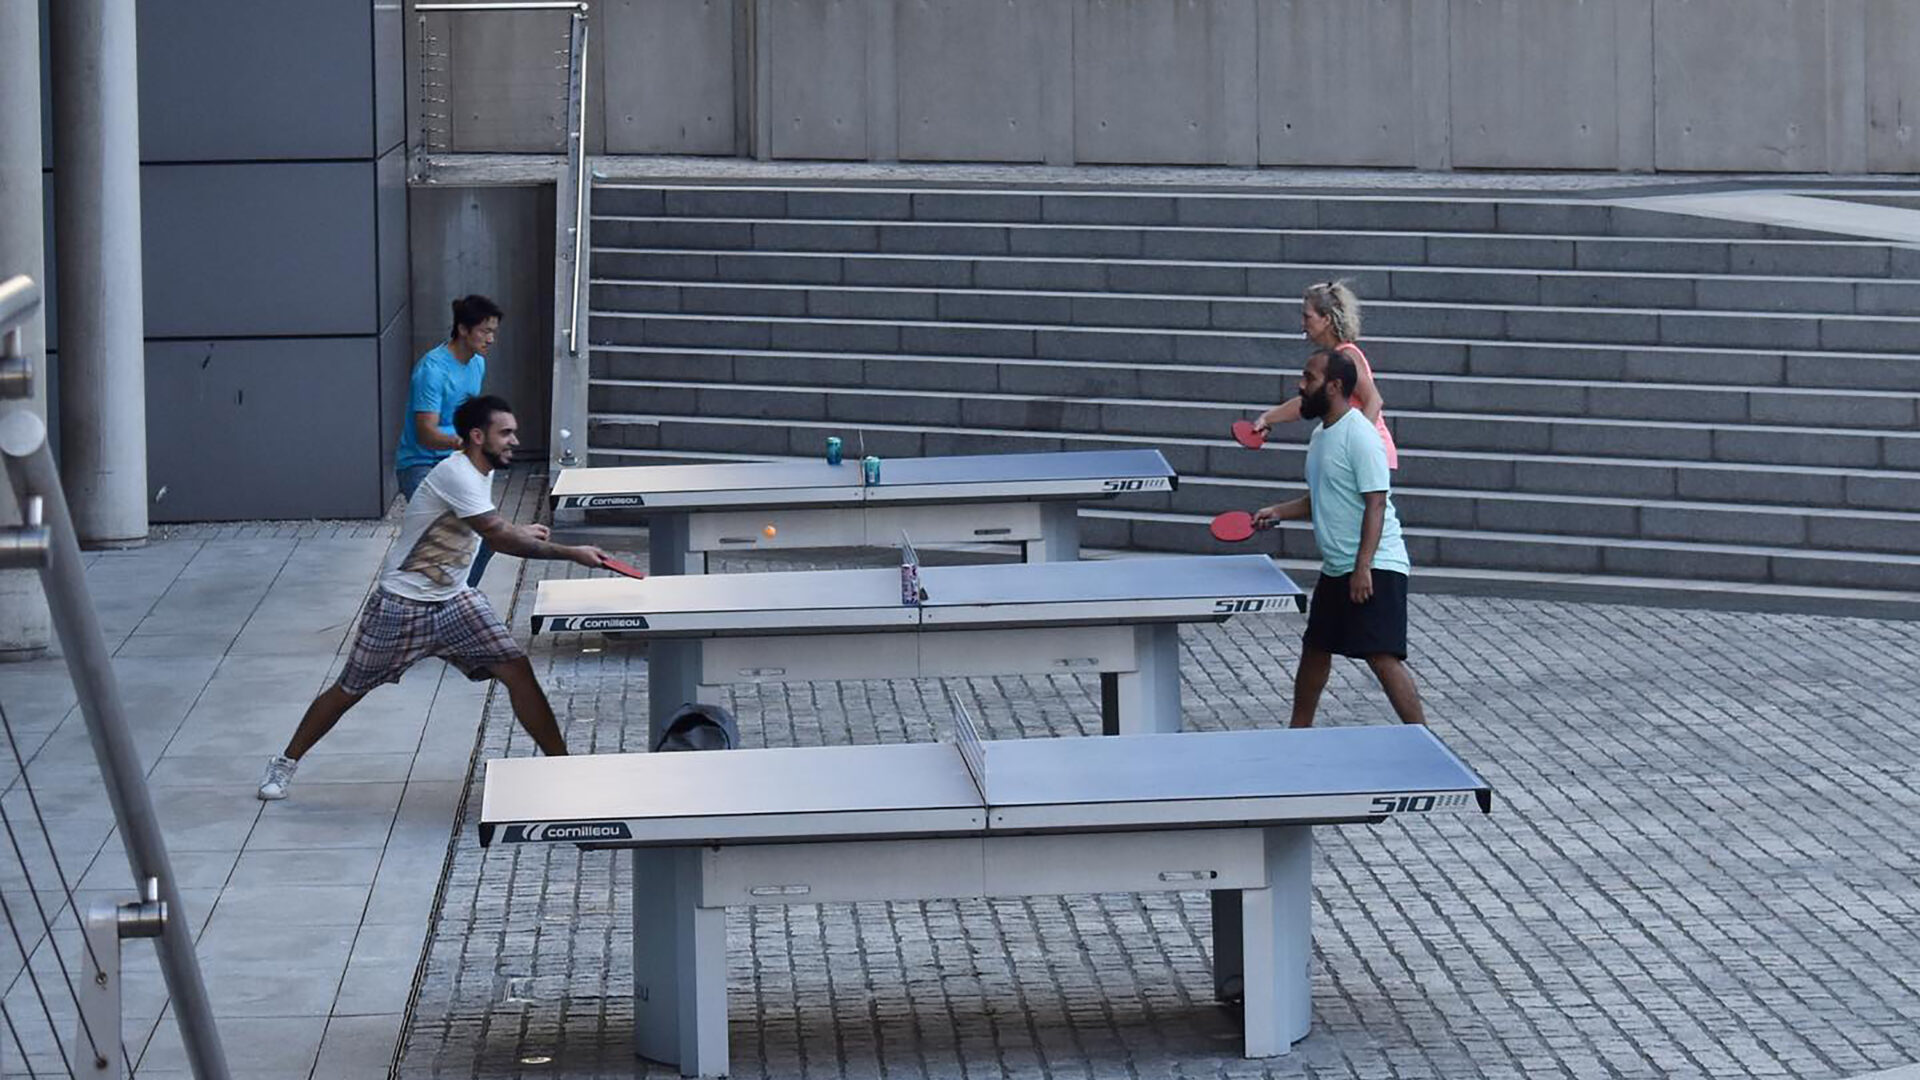 Free table tennis at Merchant Square